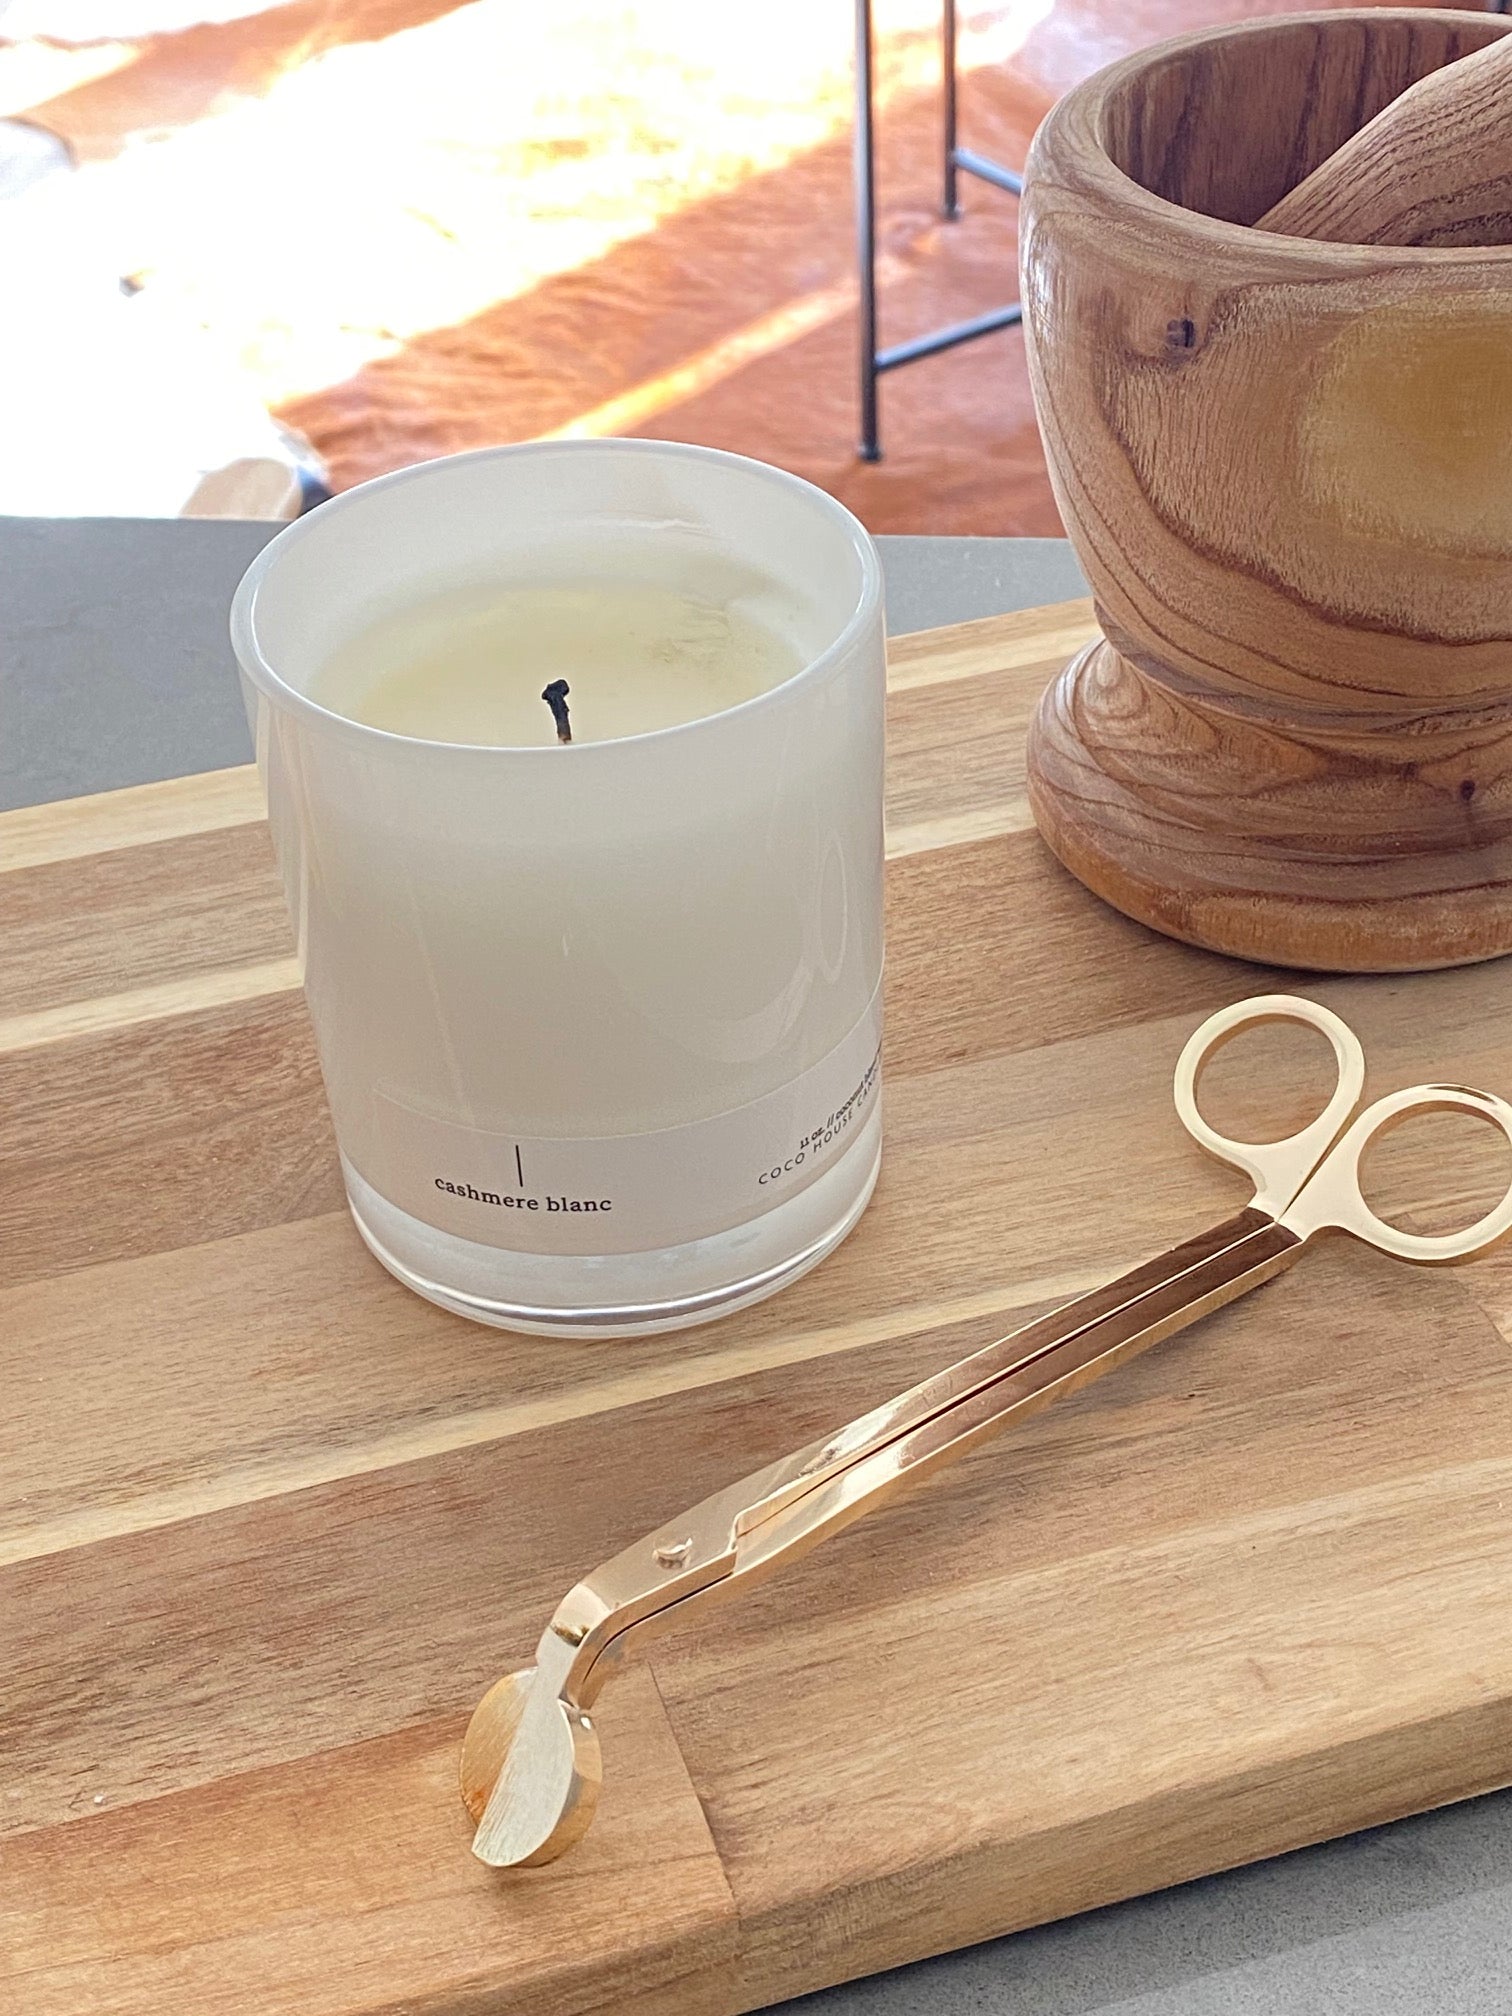 Candle Care - Trim those wicks! - Coco House Candles